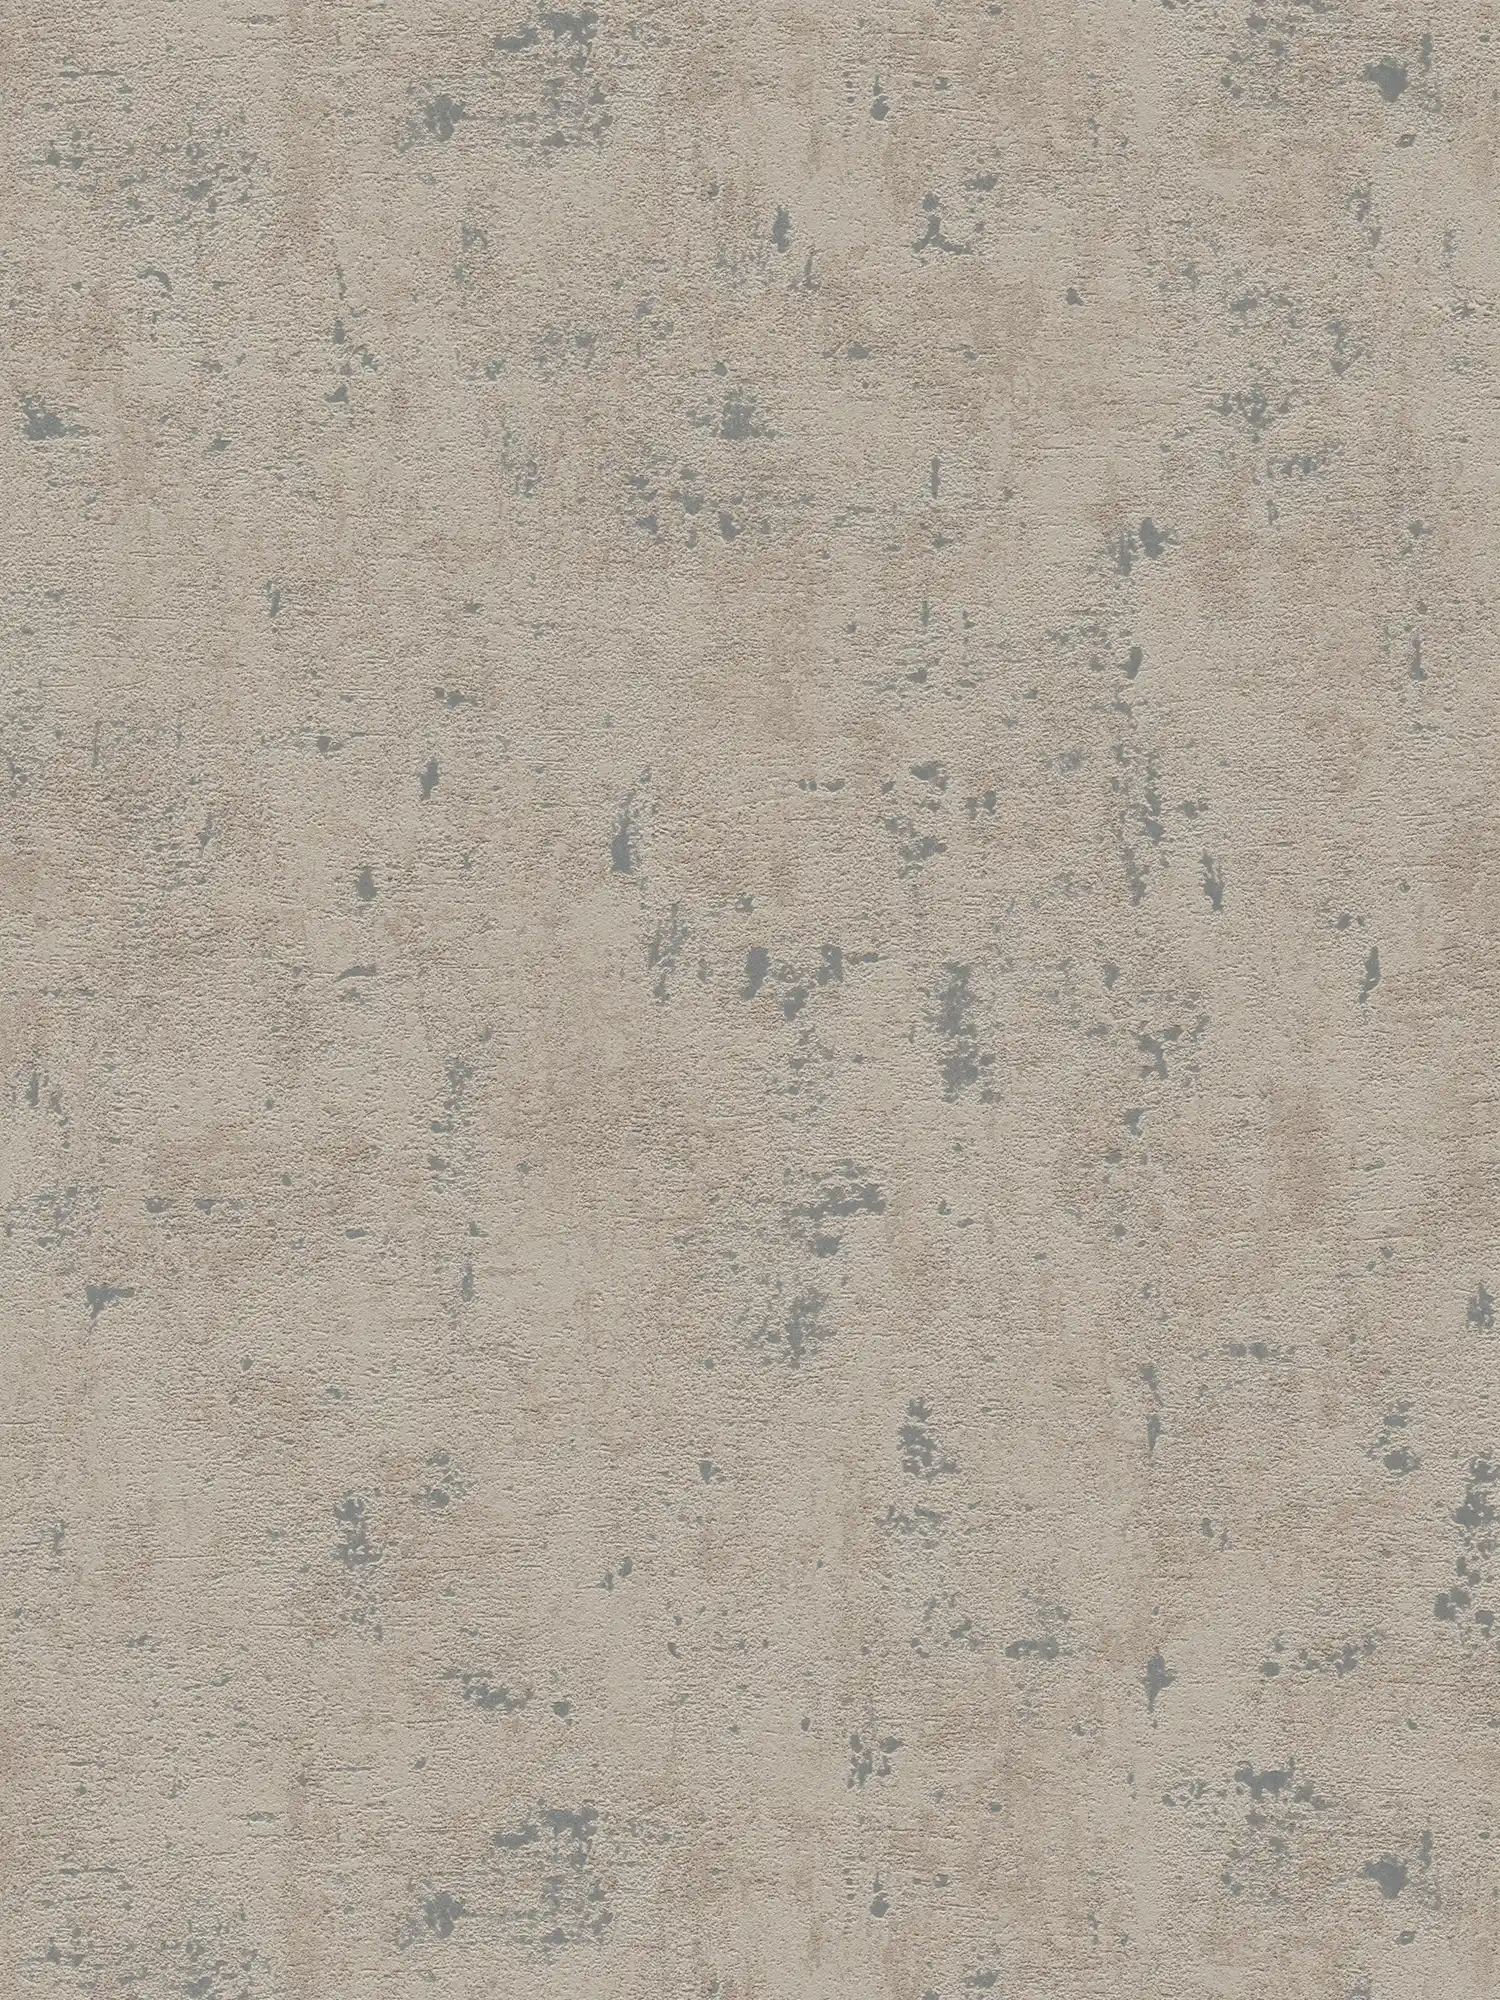 Wallpaper with abstract raffia pattern and metallic effects - grey, silver
